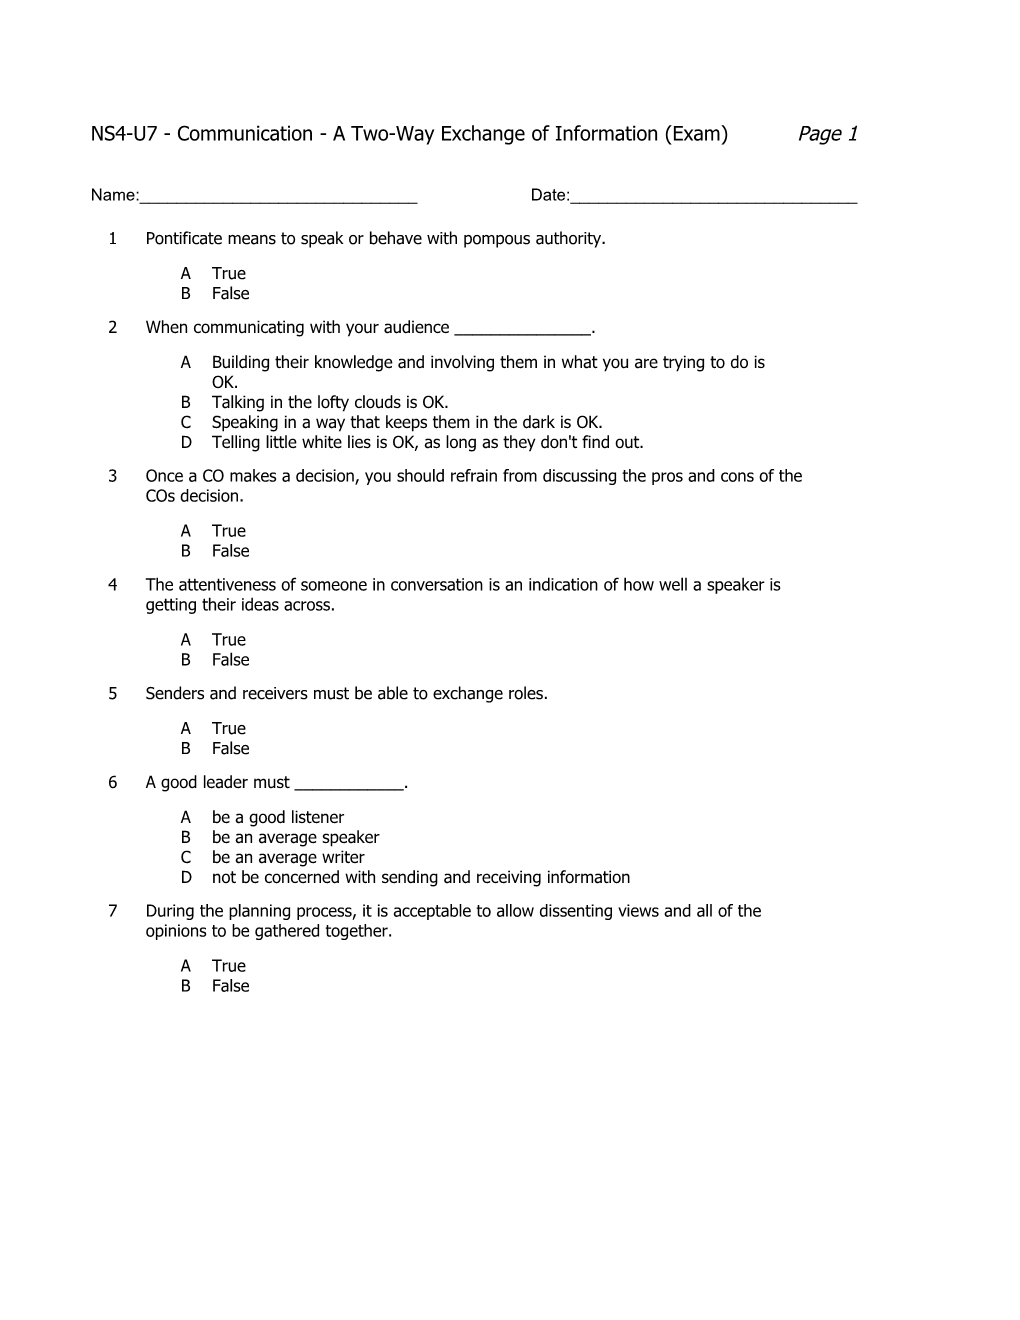 NS4-U7 - Communication - a Two-Way Exchange of Information (Exam) Page 1